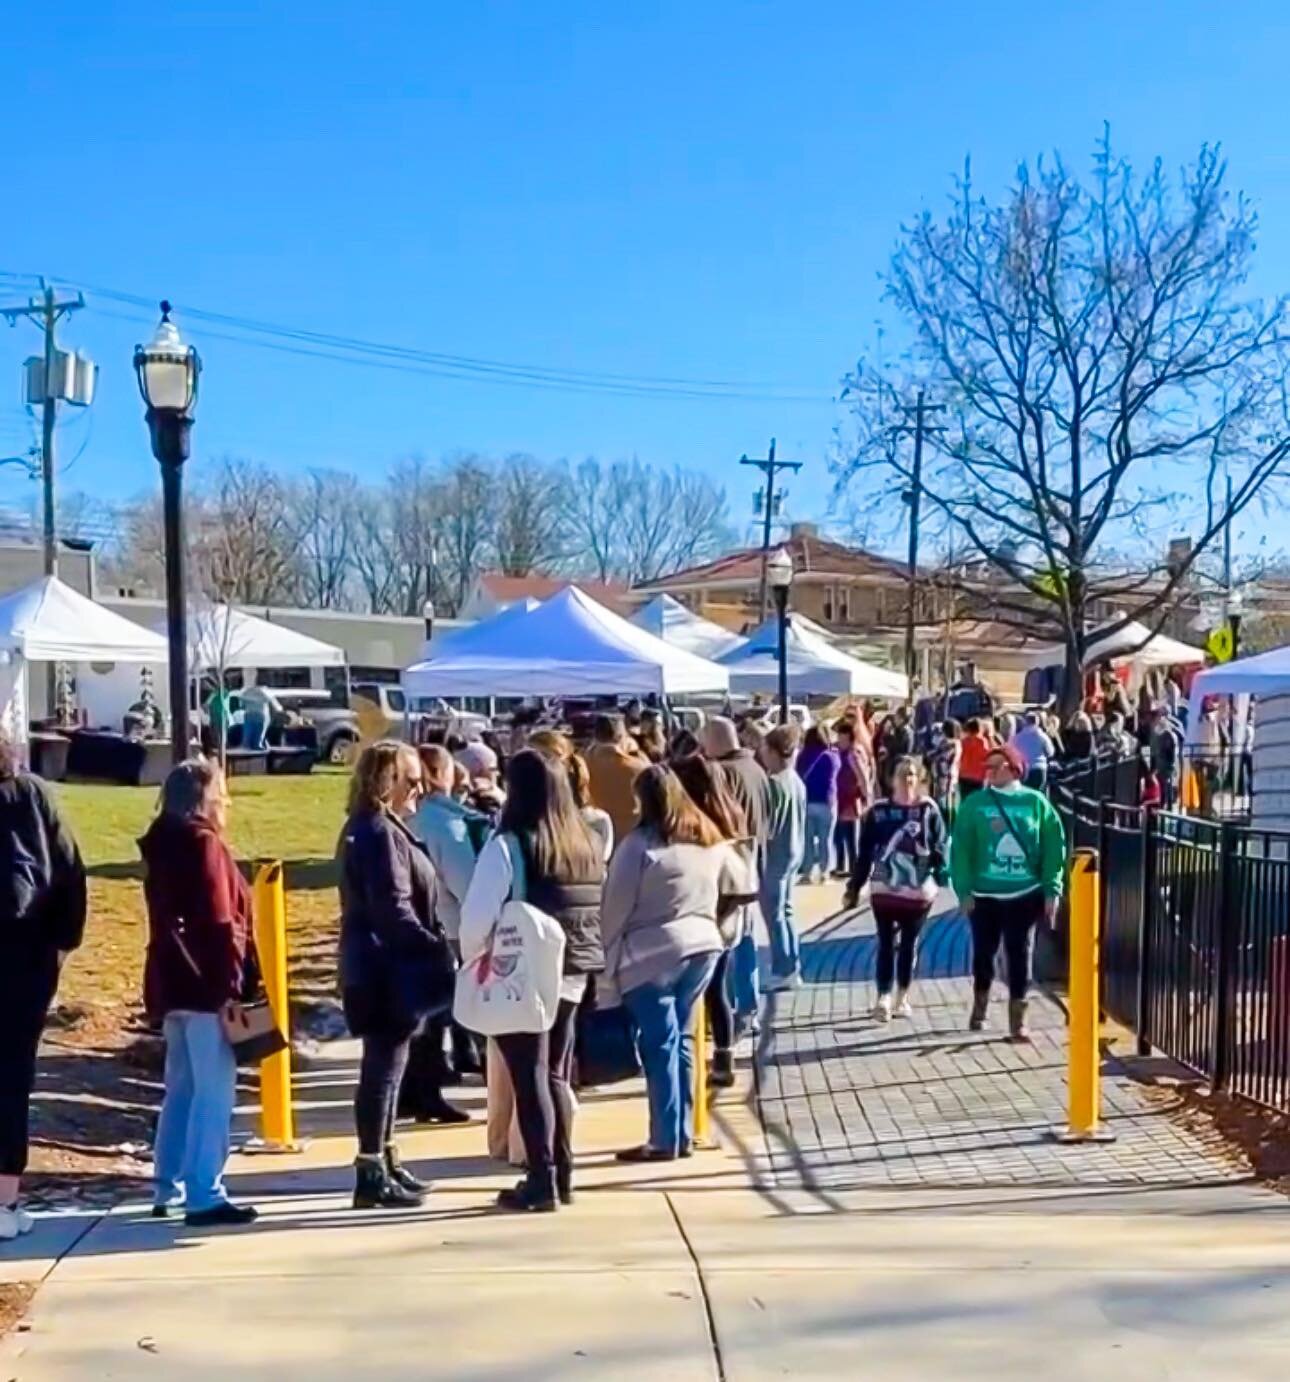 SWAG BAGs will be given out at 12pm🥳🛍️
Get in line by the pink tent across from West Side Brewing 🎄

#westsidemarketcincy #shoplocal #westsidebestside #supportsmallbusiness